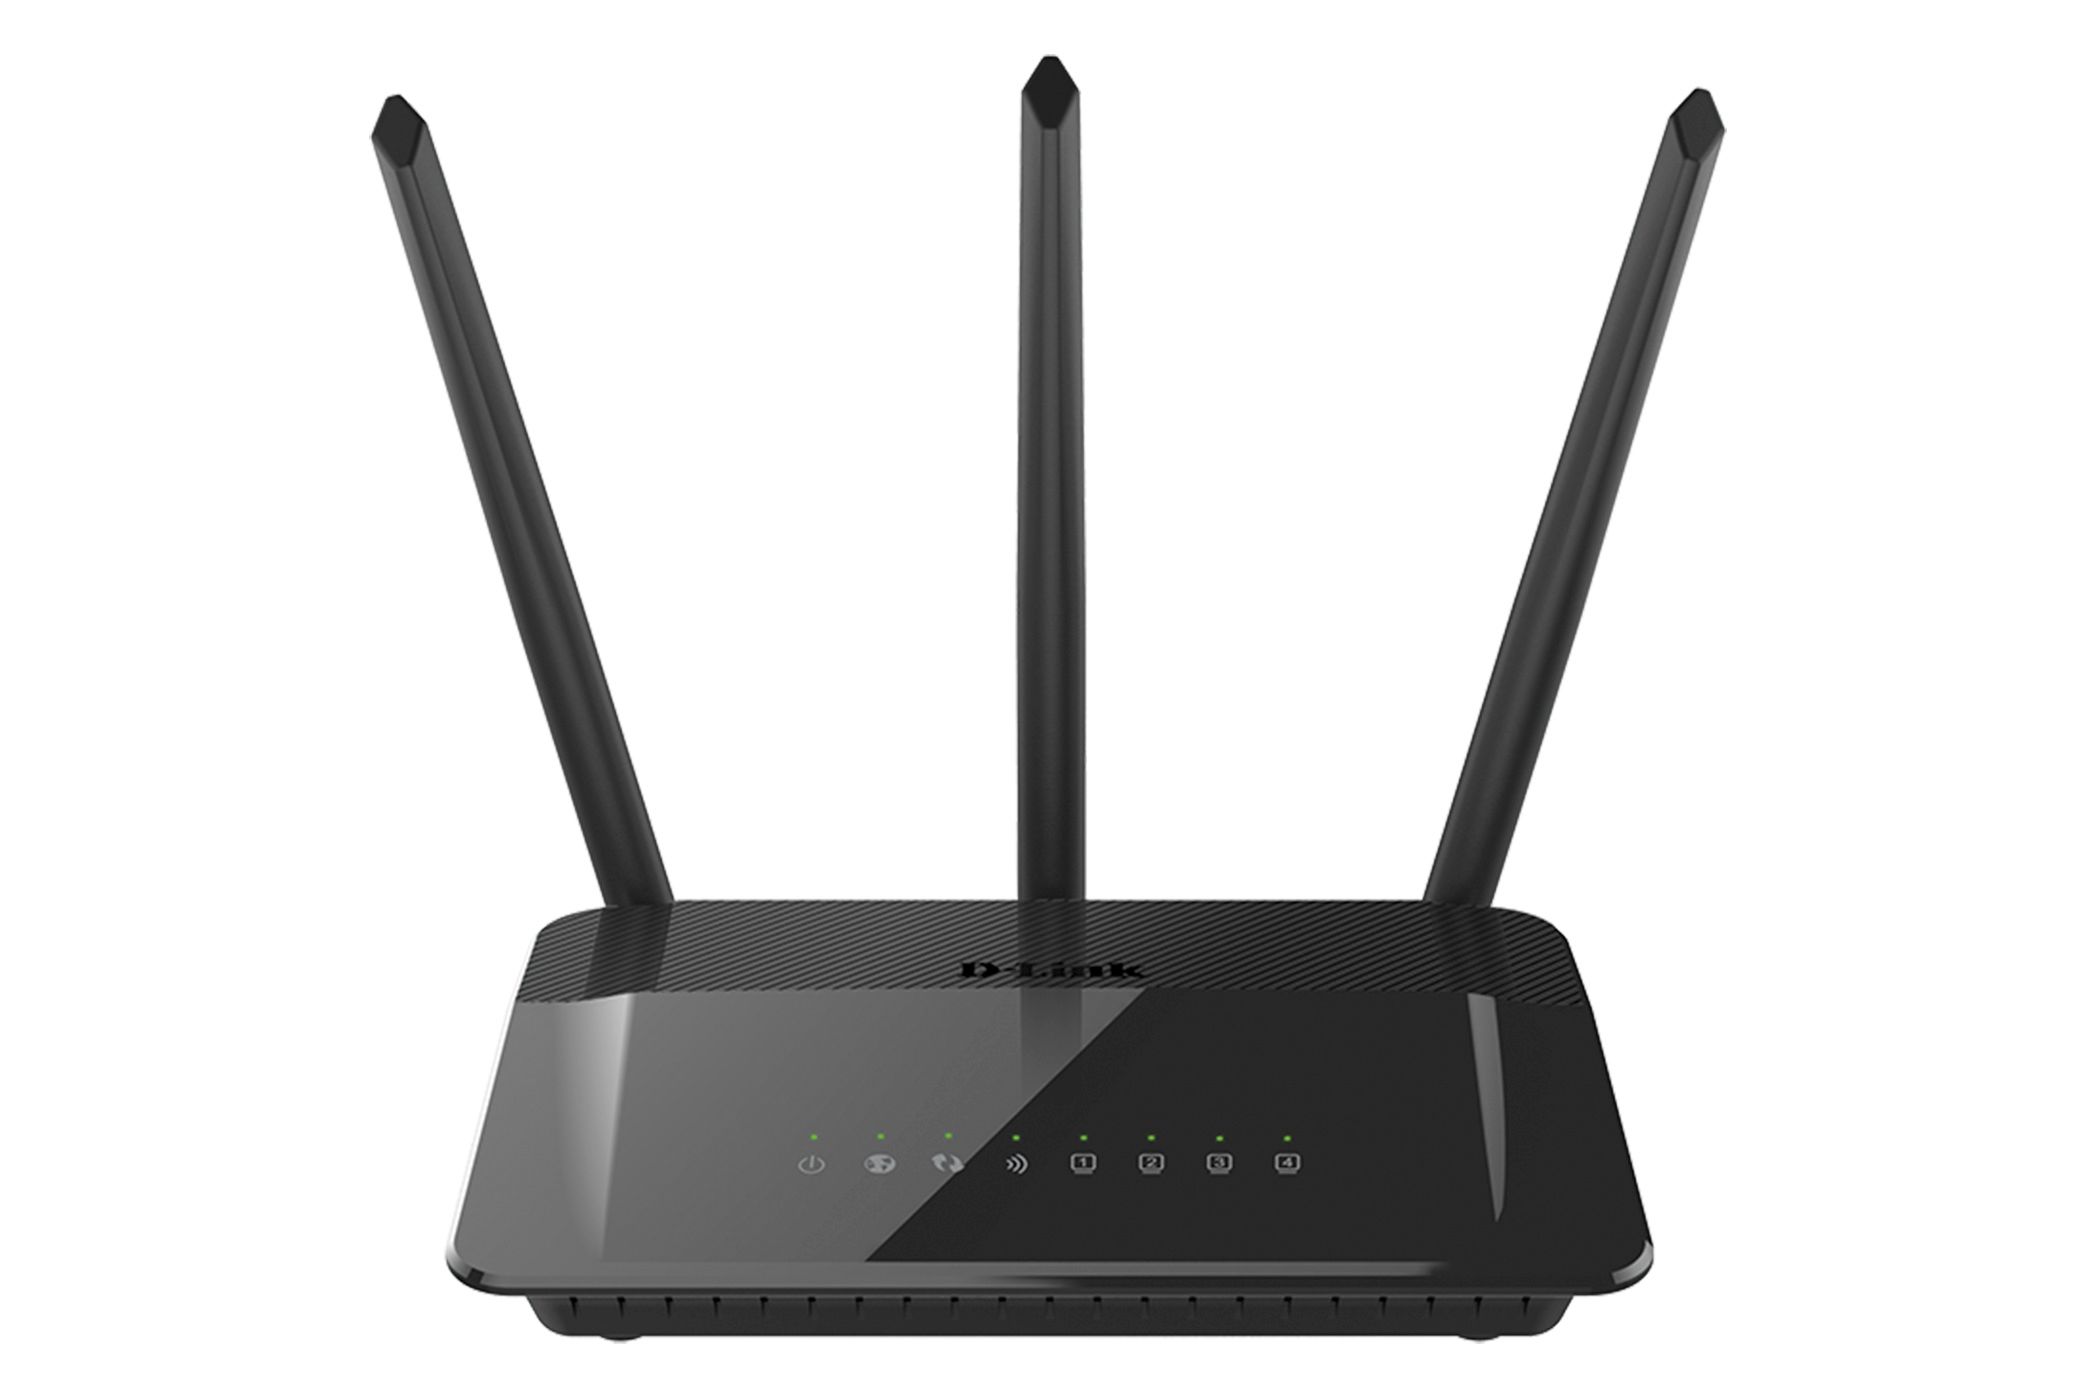 The D-Link DIR-856 router on a white background.